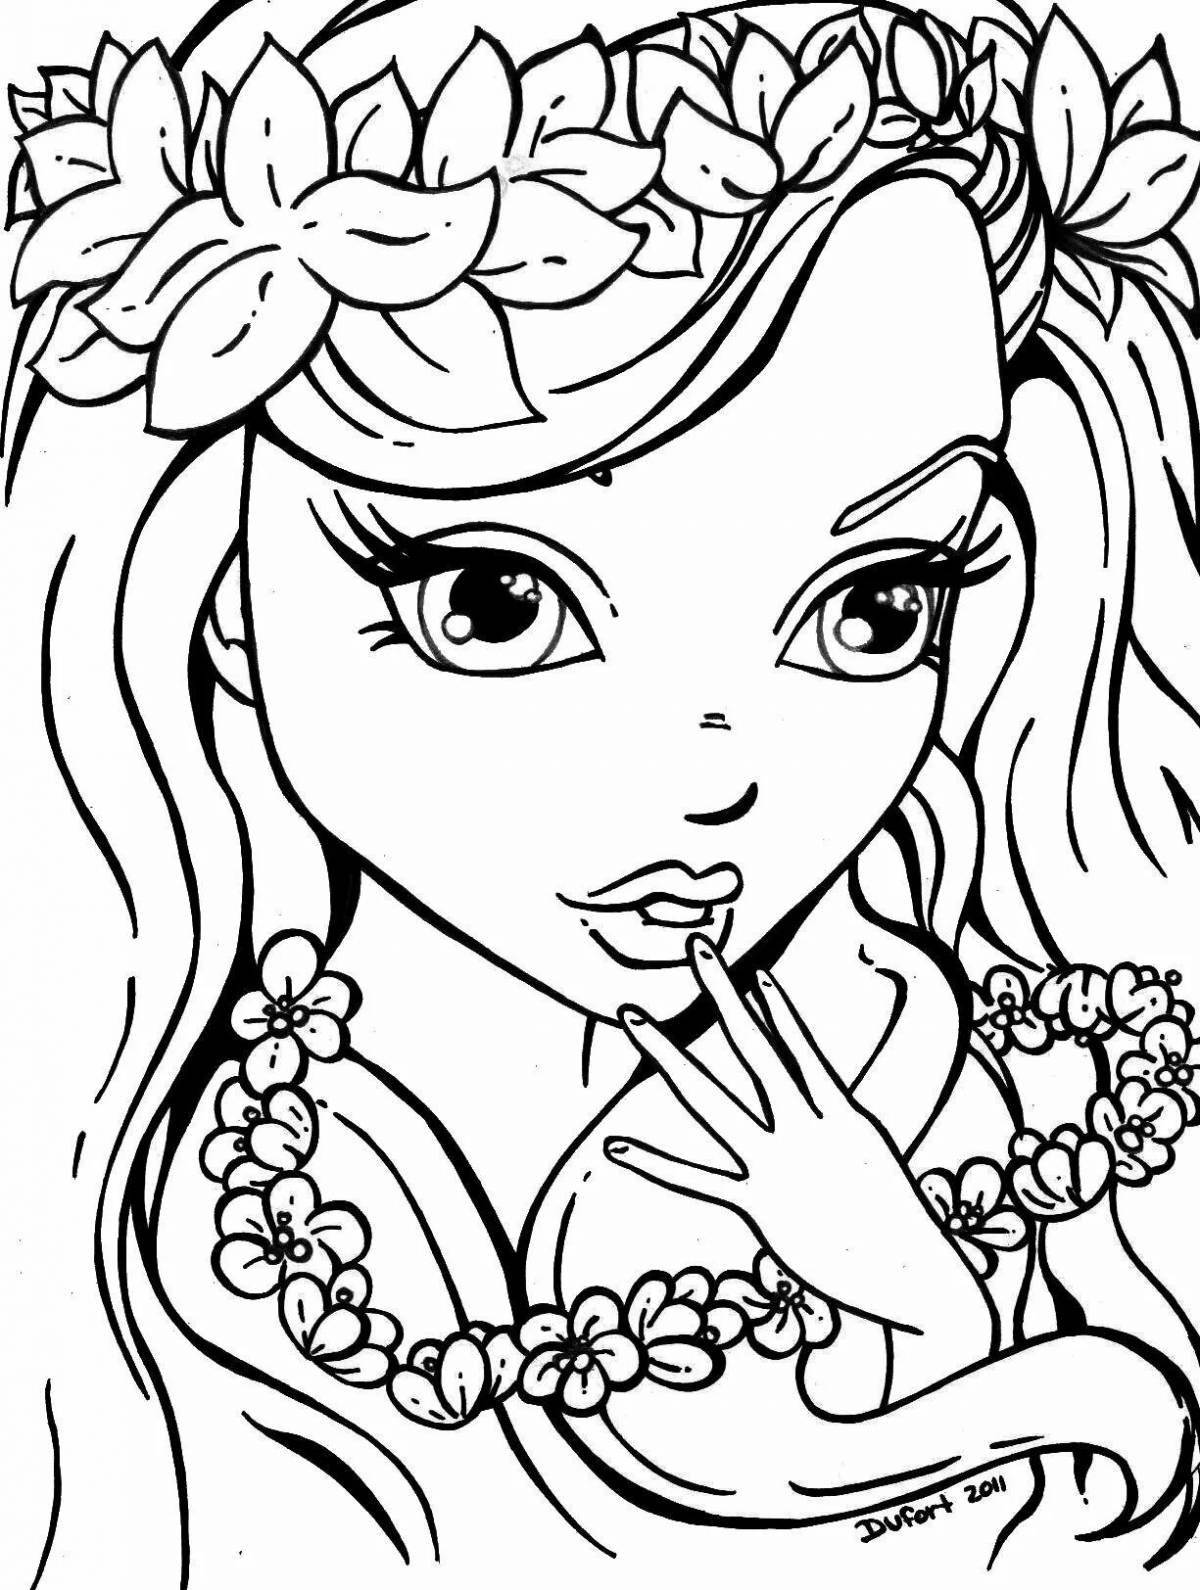 Coloring book for girls 9-8 years old